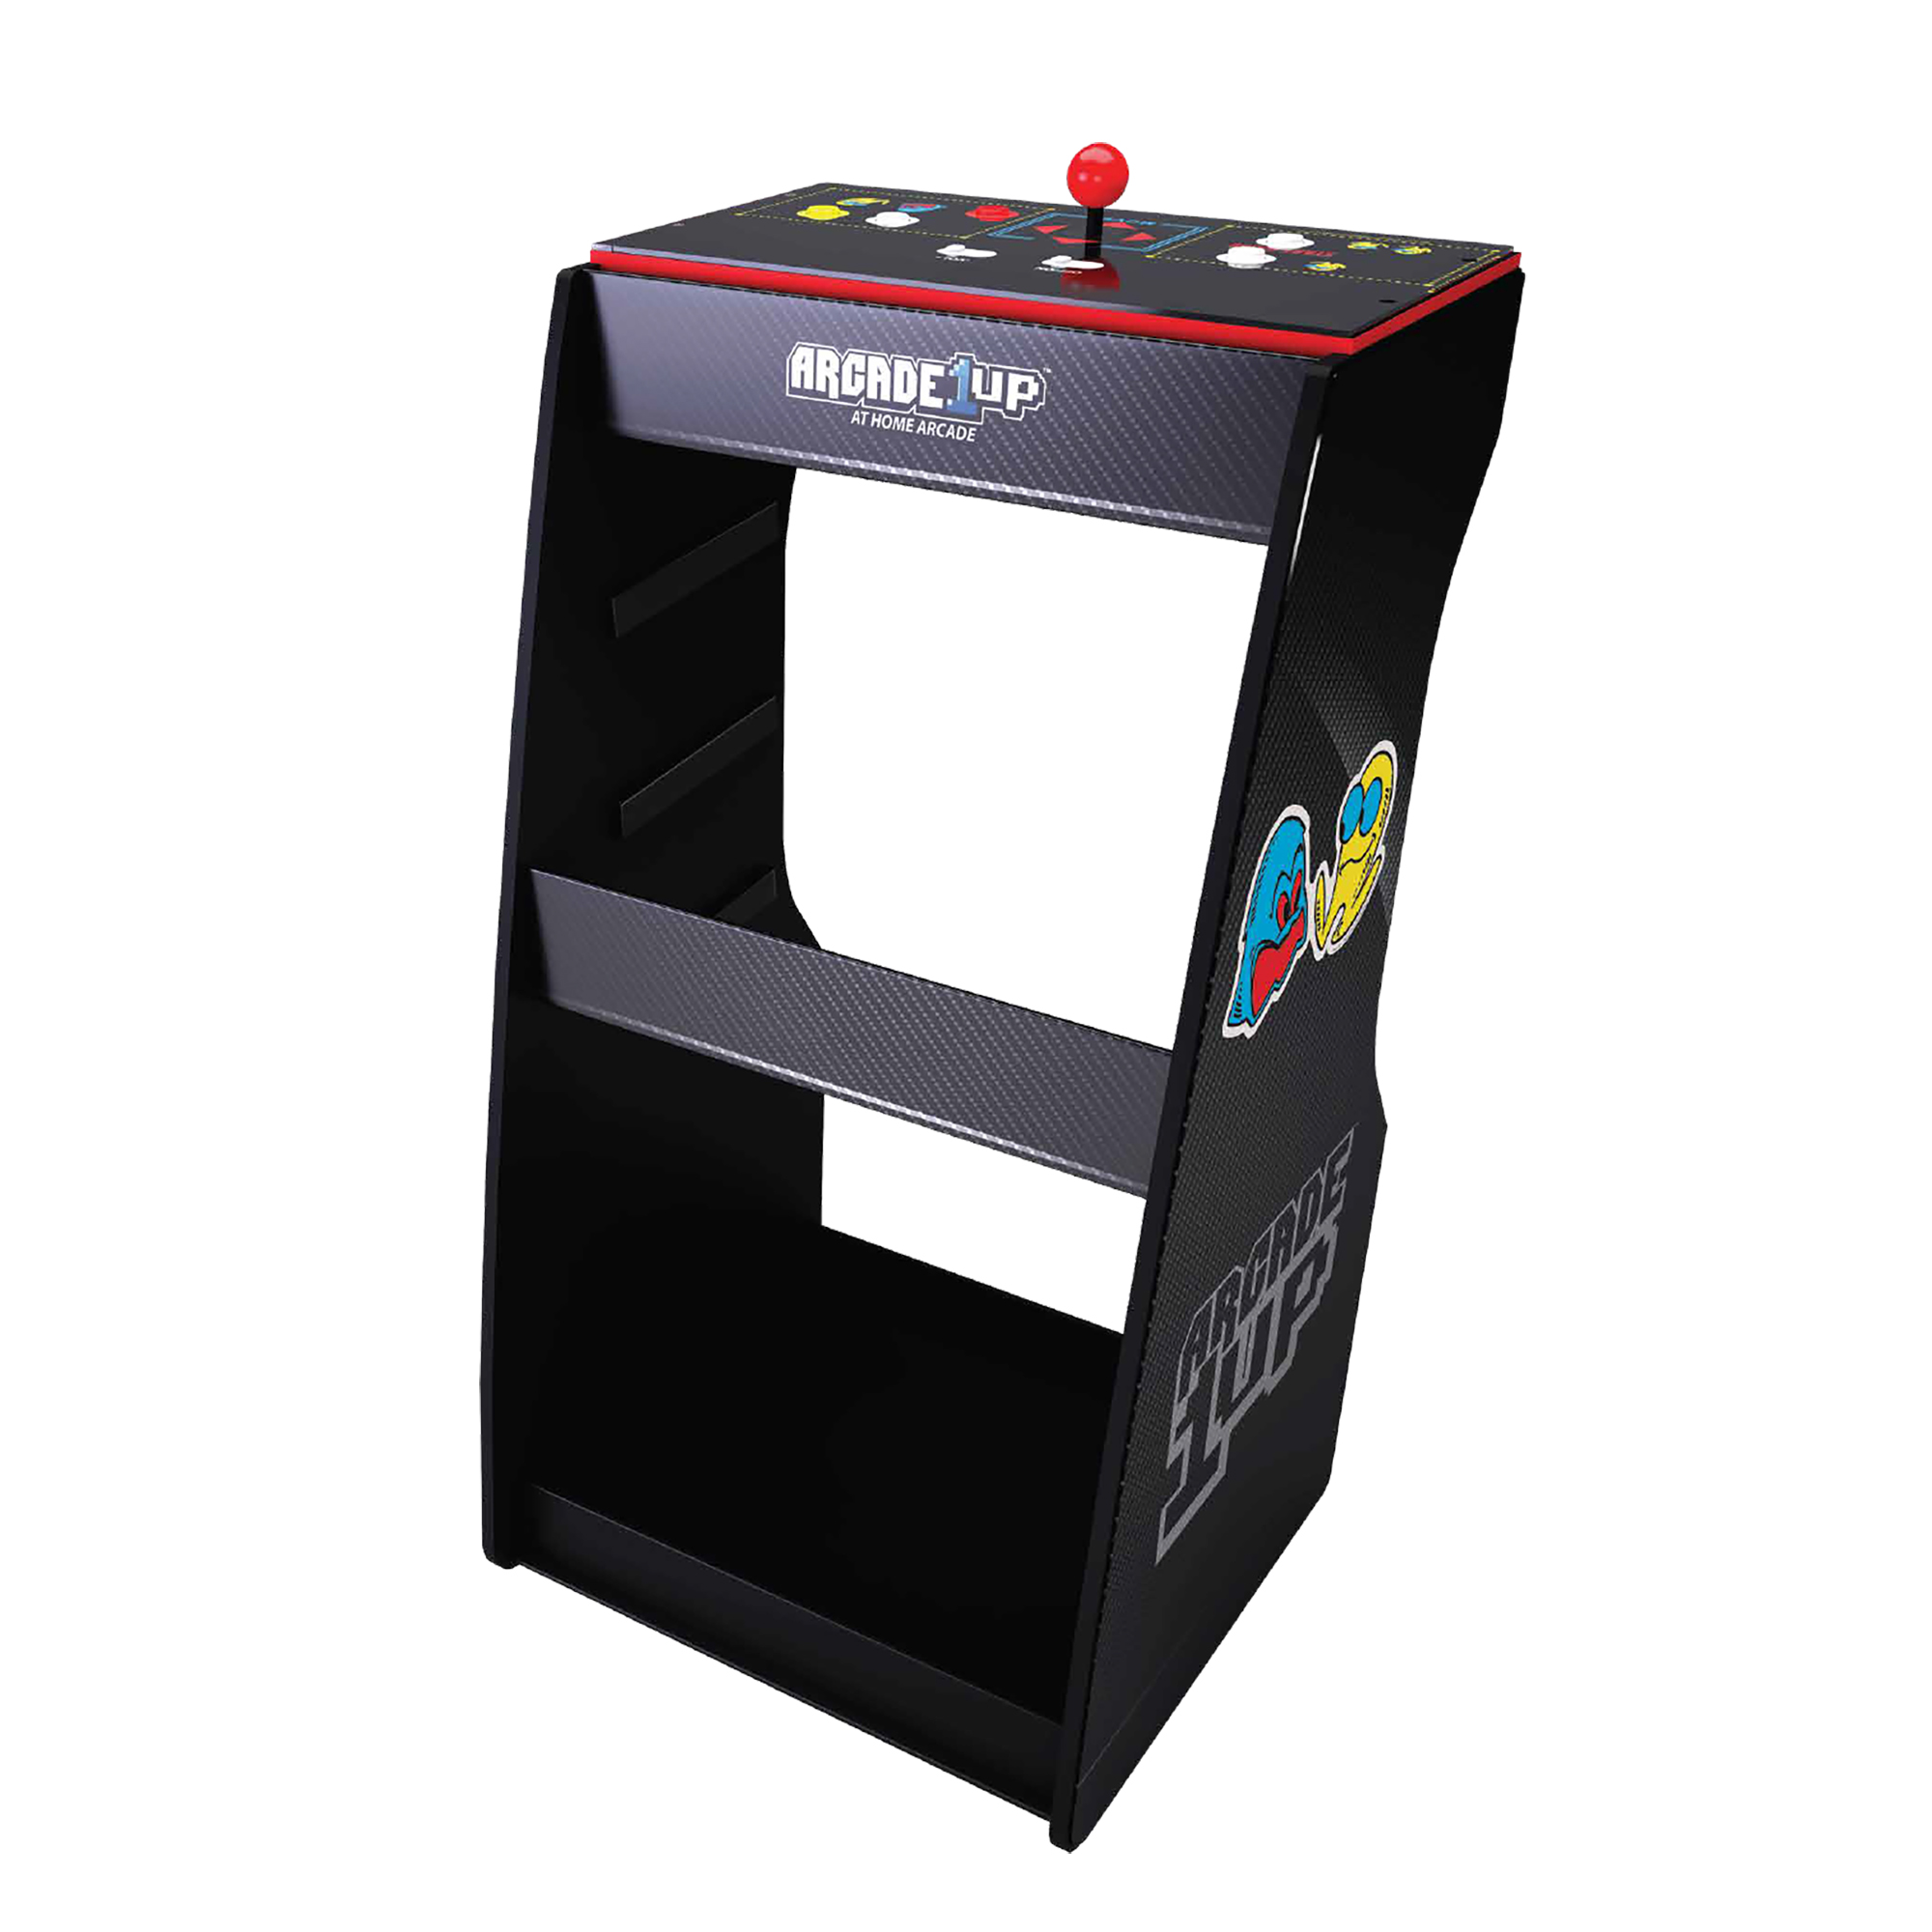 Arcade1Up Projector-Cade, Pac-Man Arcade Game System - image 3 of 7